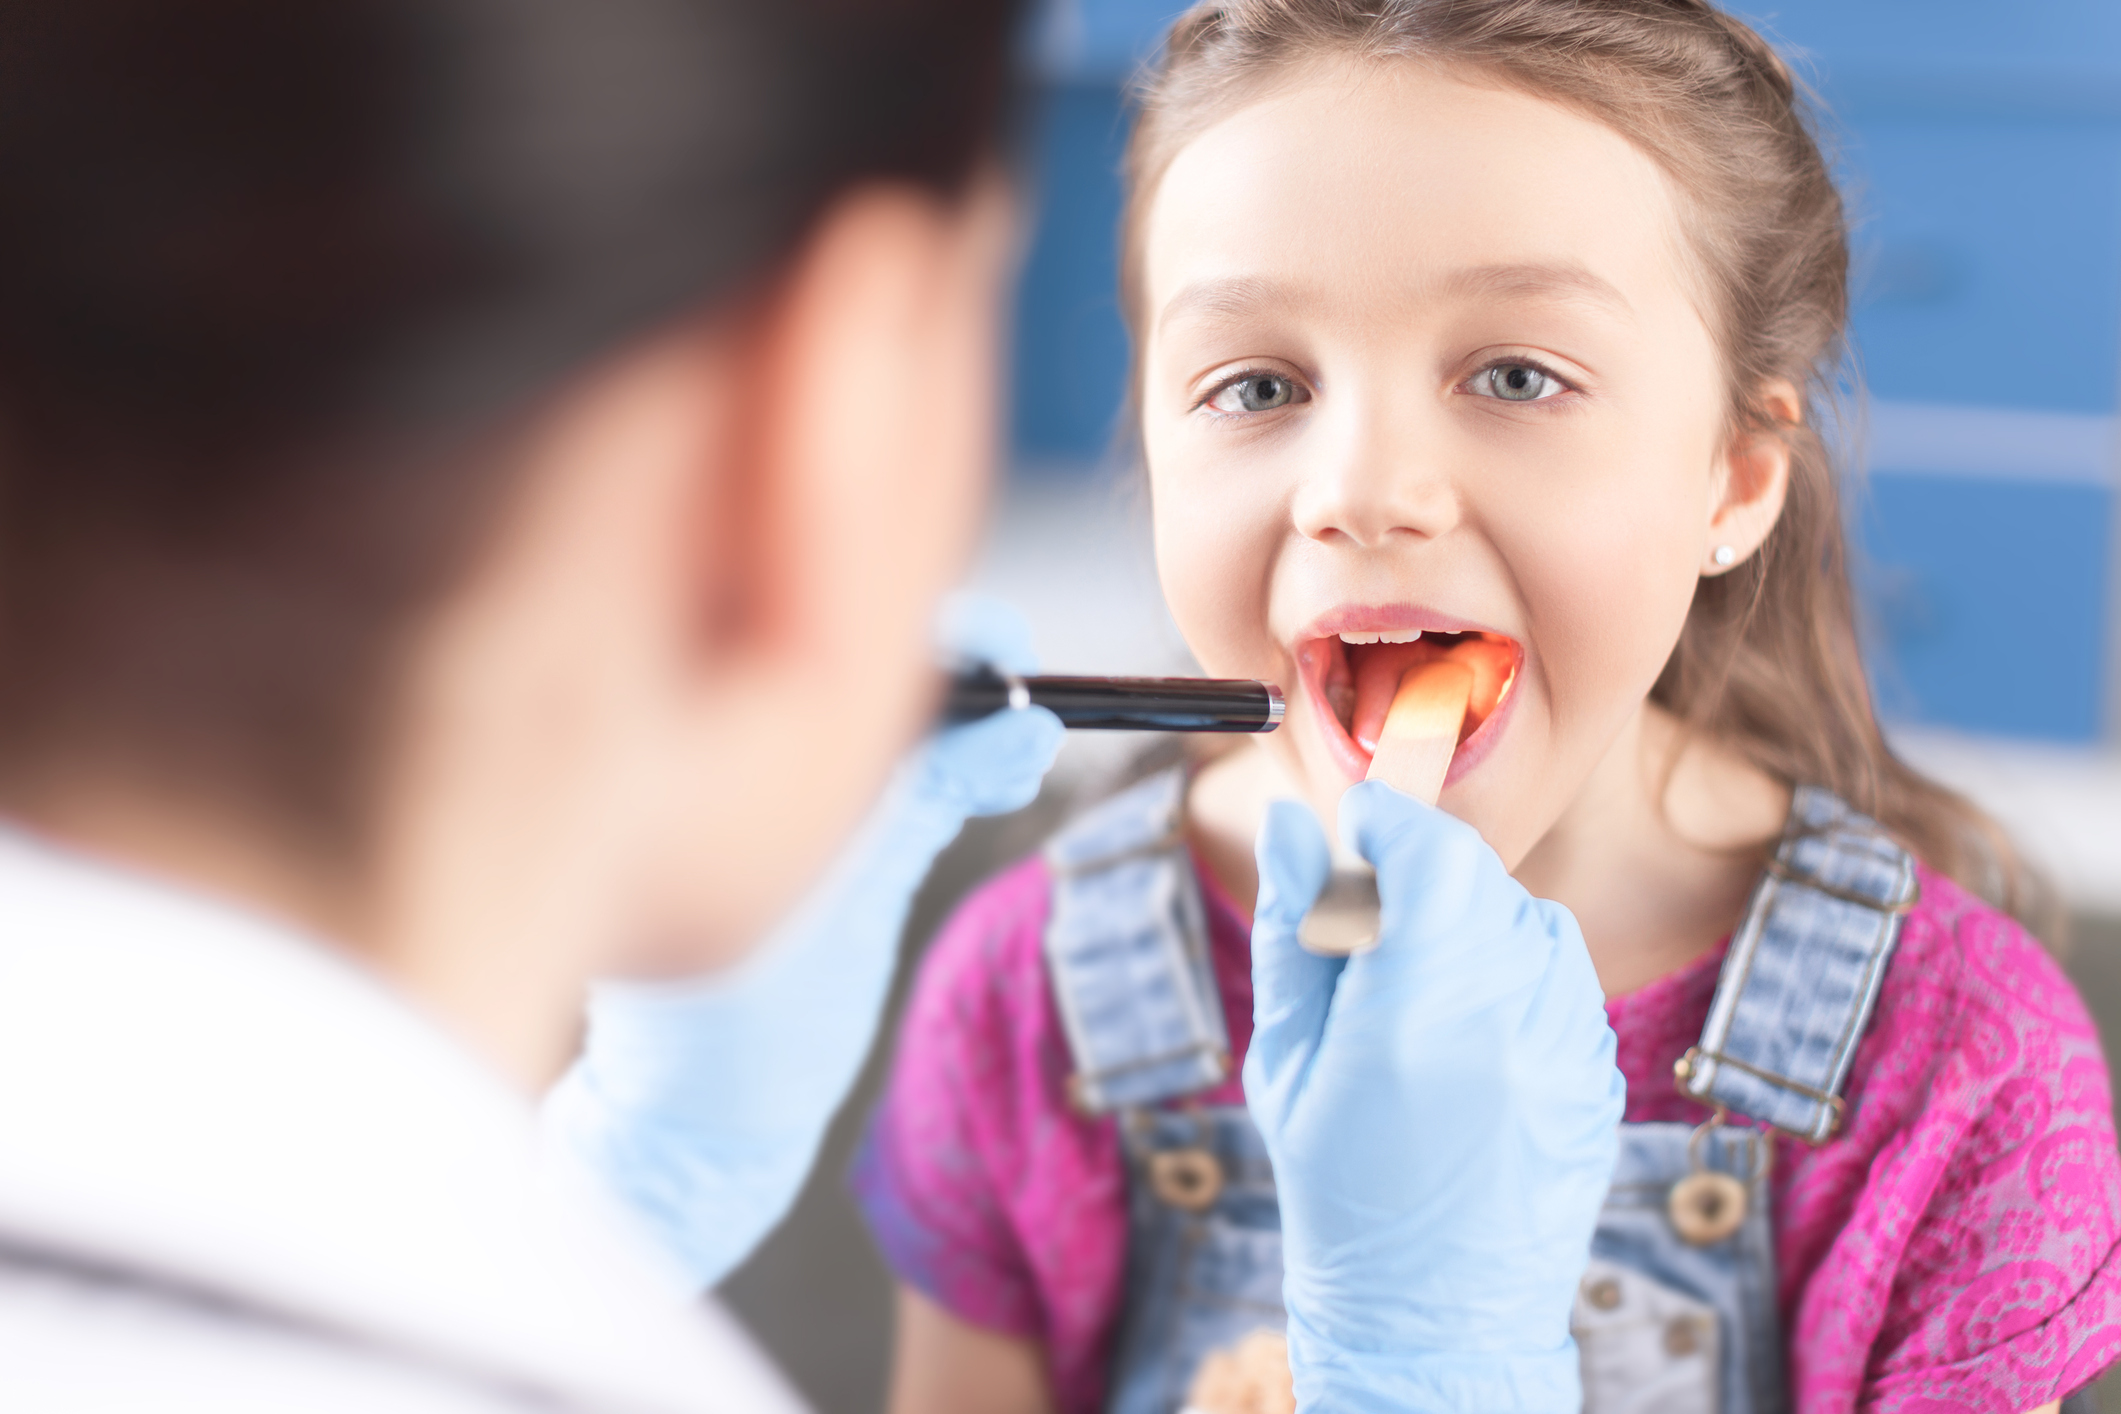 Is It Time To Have Your Child's’ Tonsils Removed